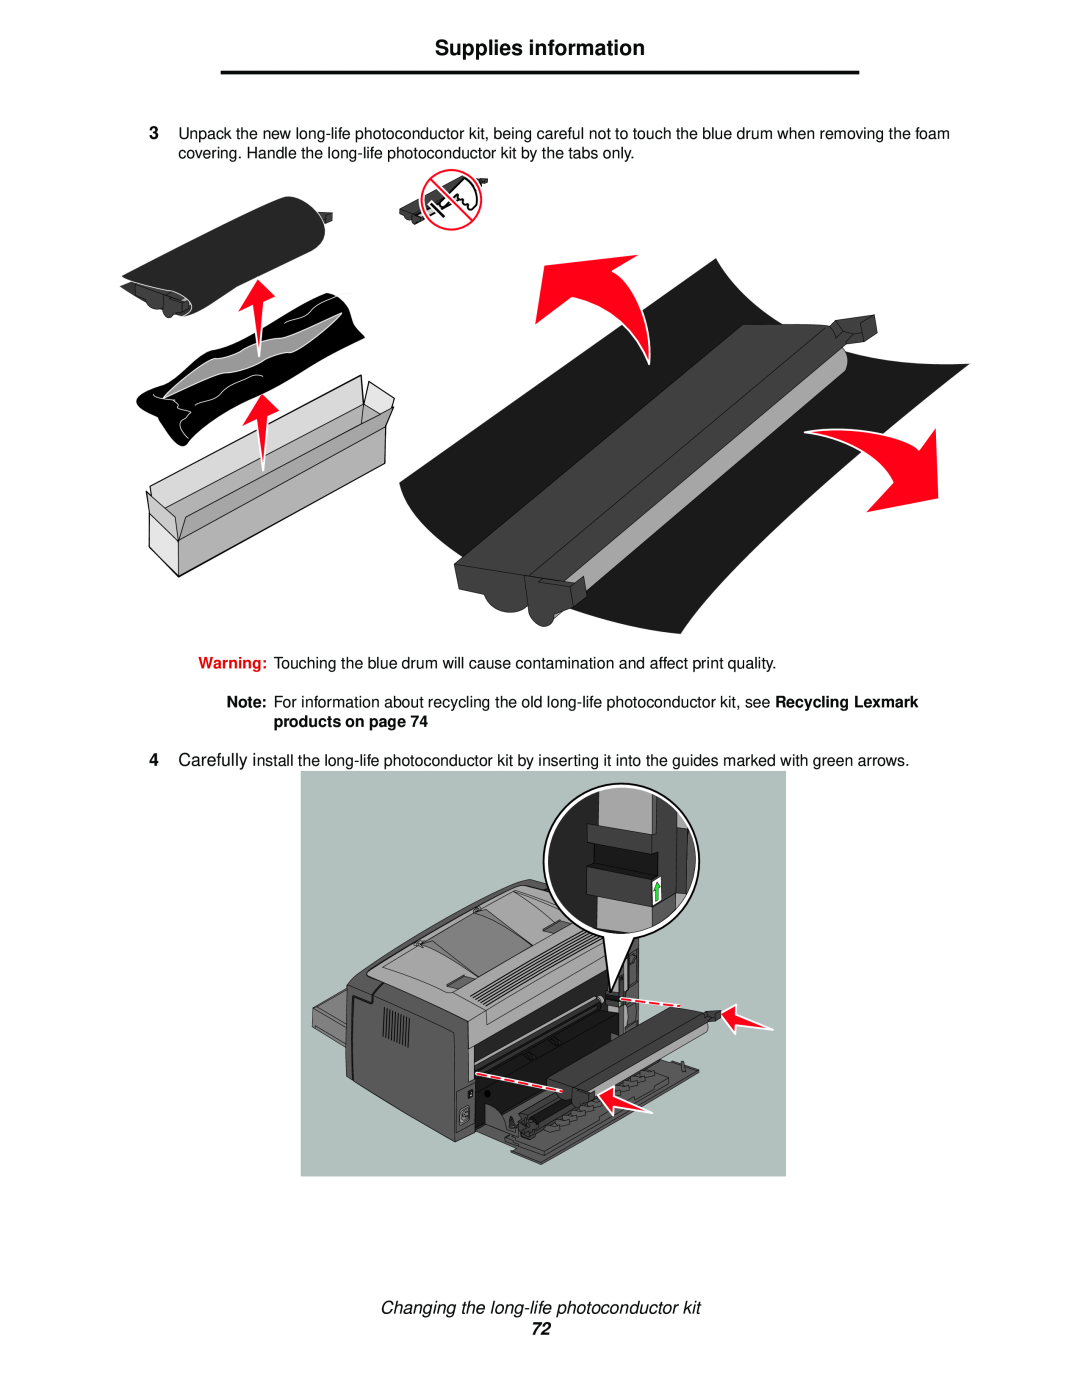 Lexmark 120 manual Supplies information, Changing the long-life photoconductor kit 